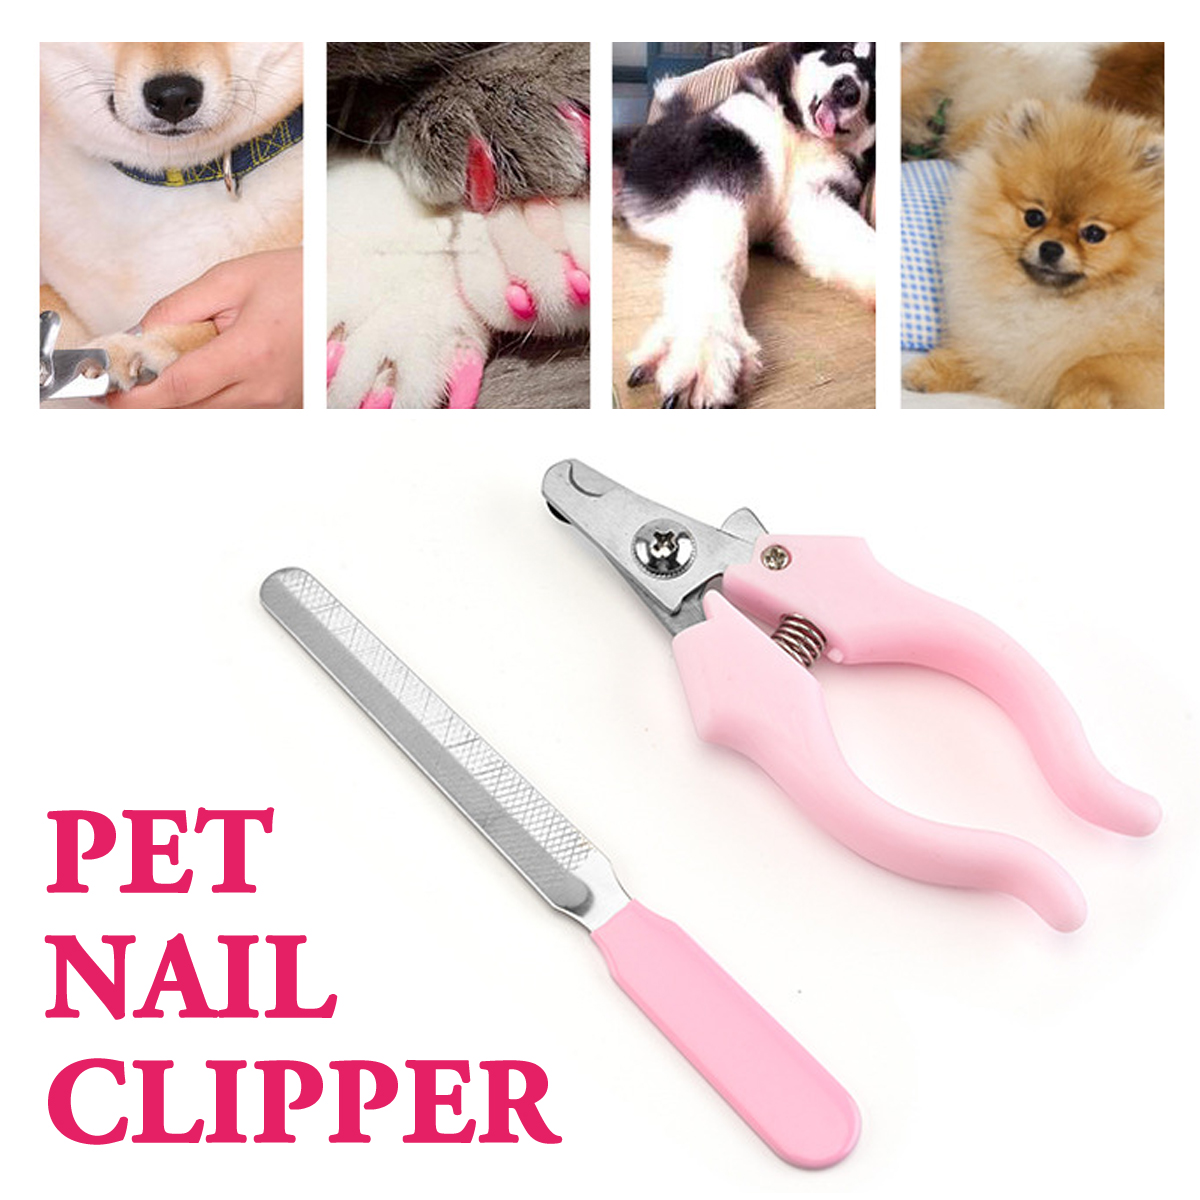 Stainless-Steel-Pet-Nail-Clipper-Nail-File-Trimmer-With-Safety-Guard-For-Dogs-And-Cats-1724332-1